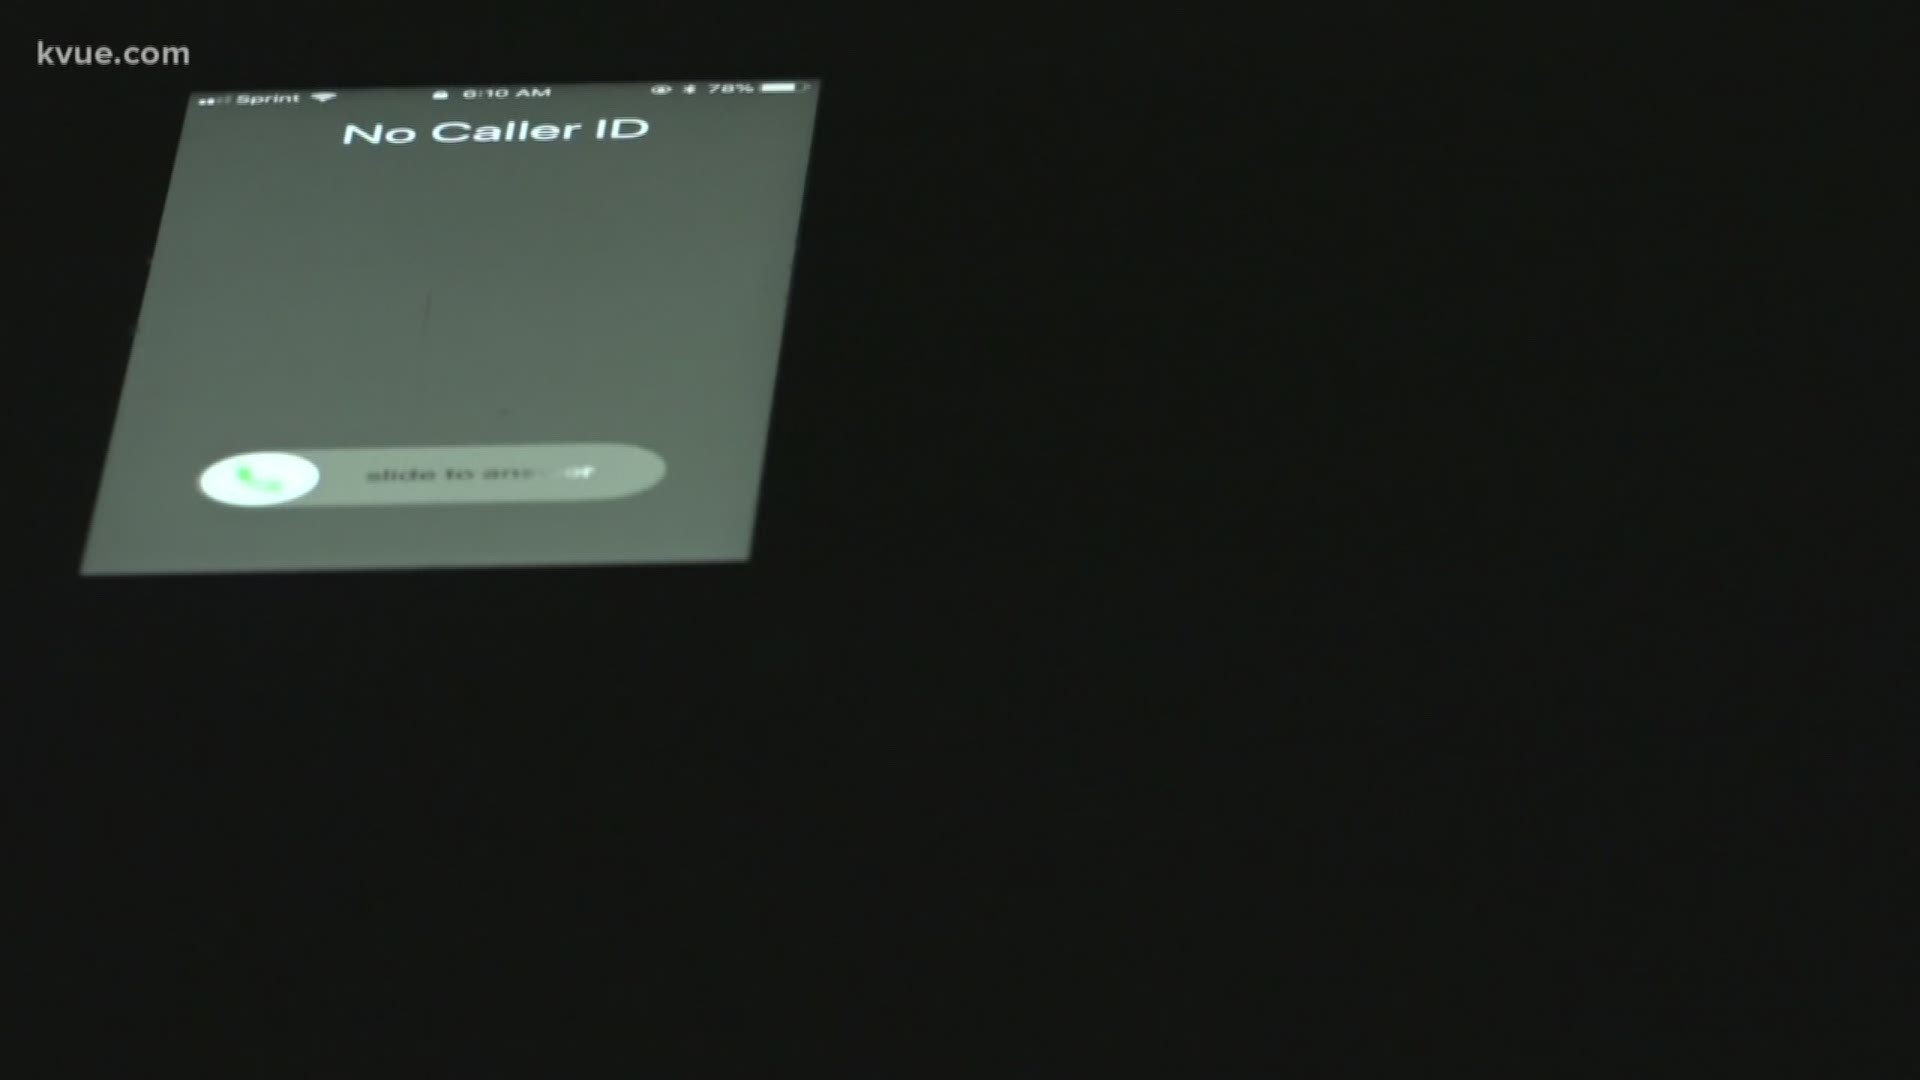 We all get those annoying robocalls, but can they be stopped? KVUE investigates.